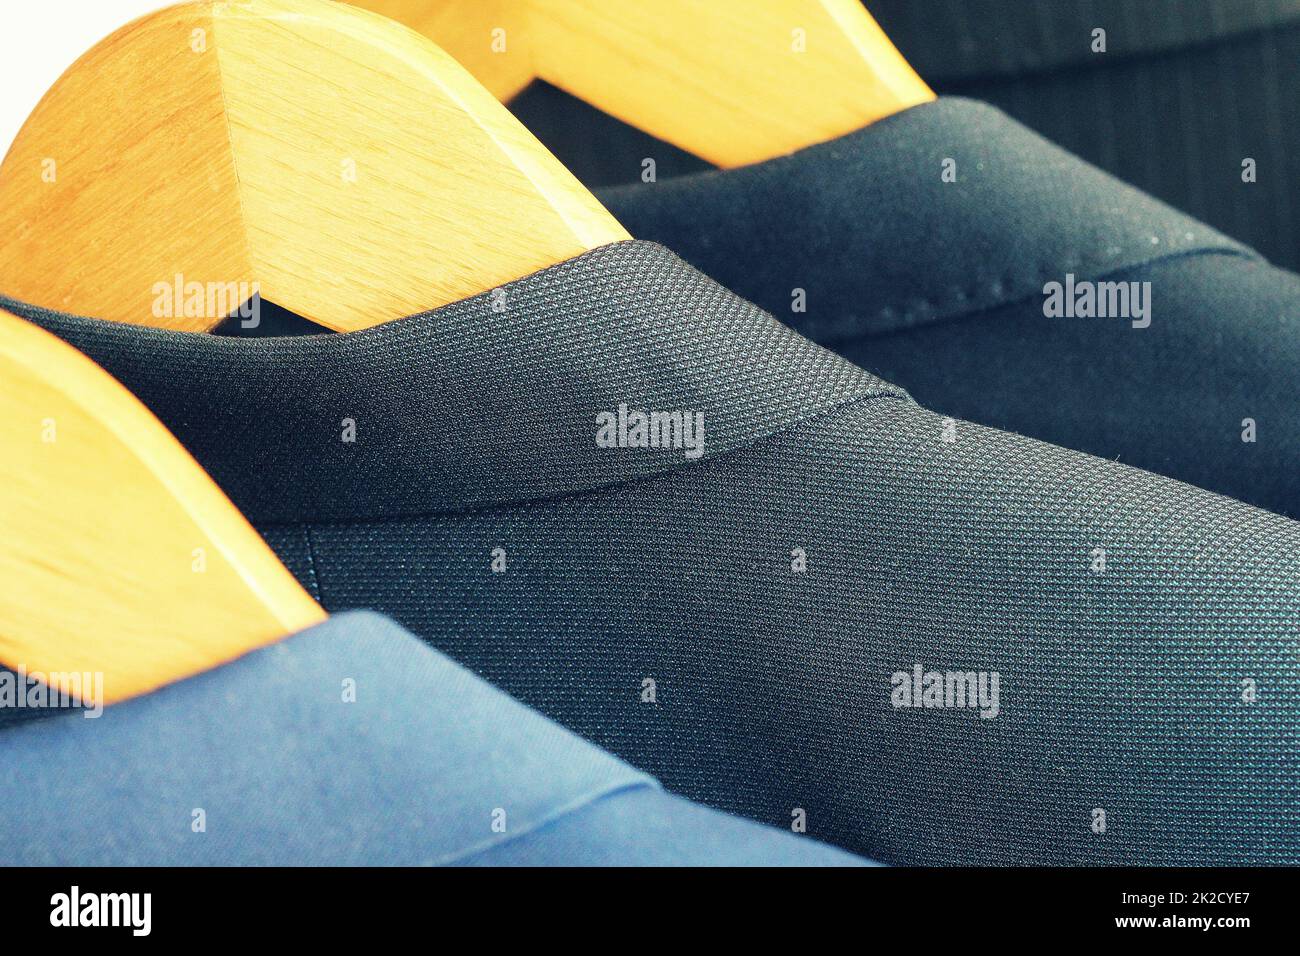 Row of classic men's suits hanging for sale Stock Photo